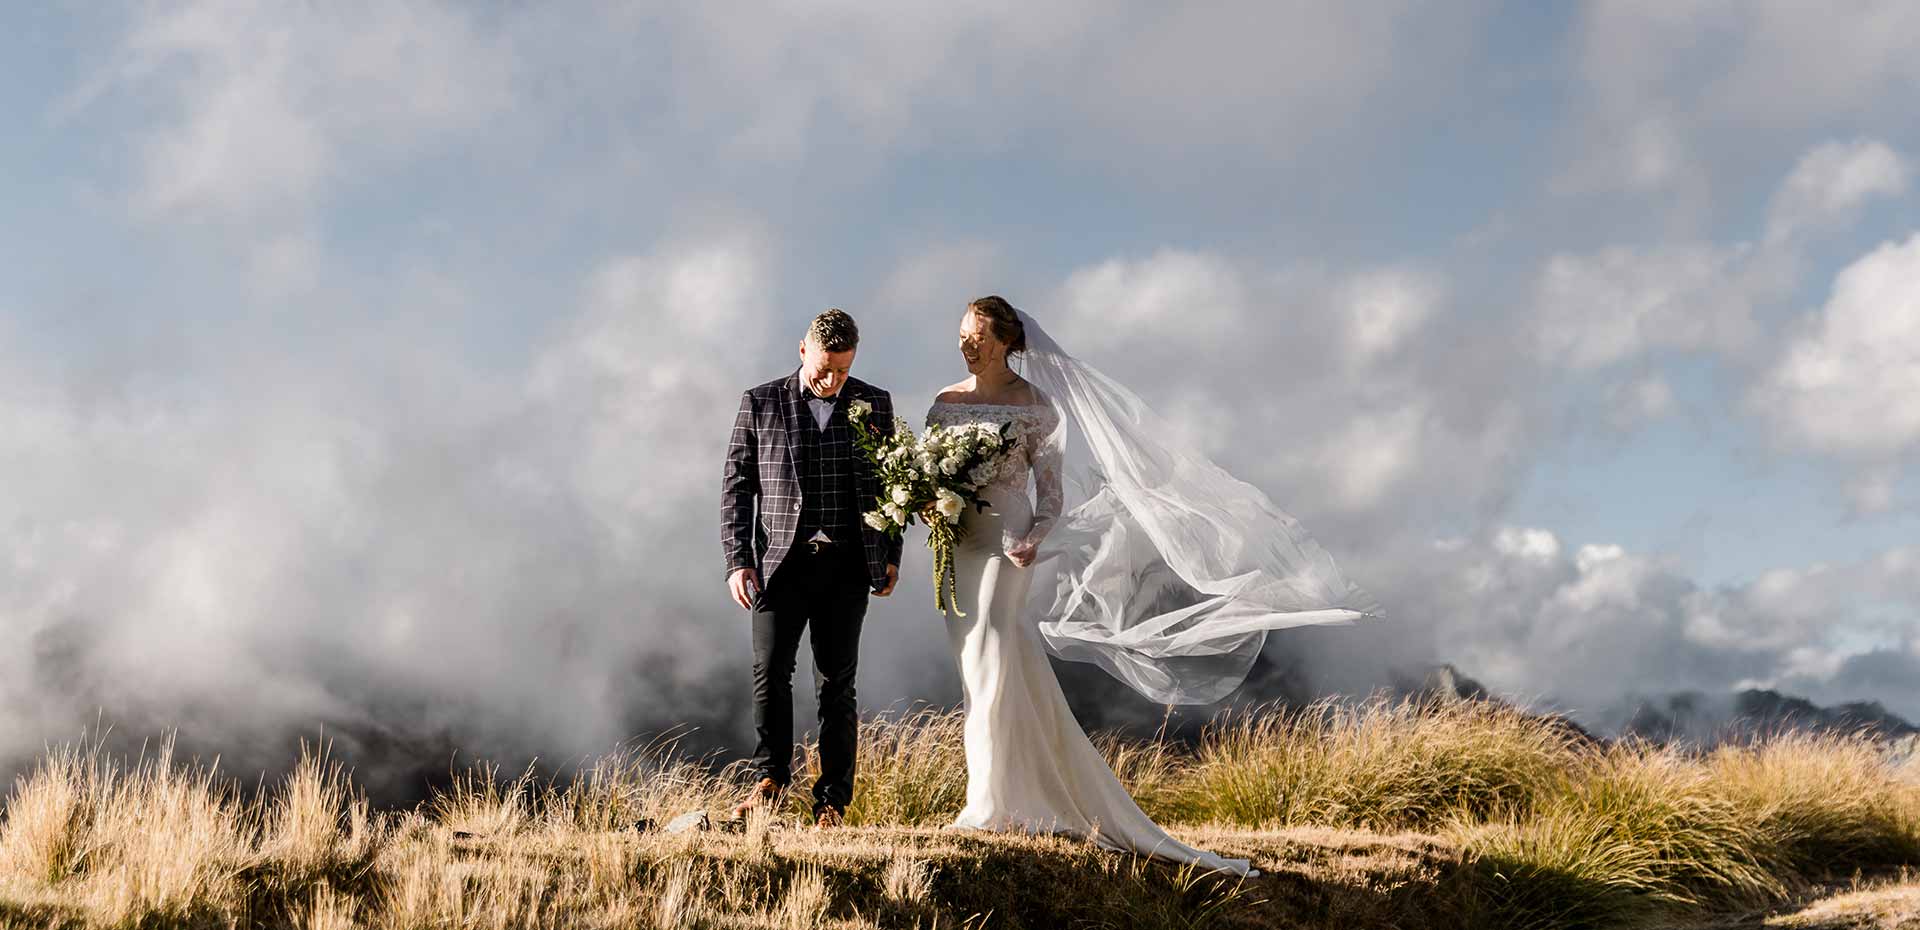 Alpine Heli elopement packages. Photo by Dawn Thomson Photography